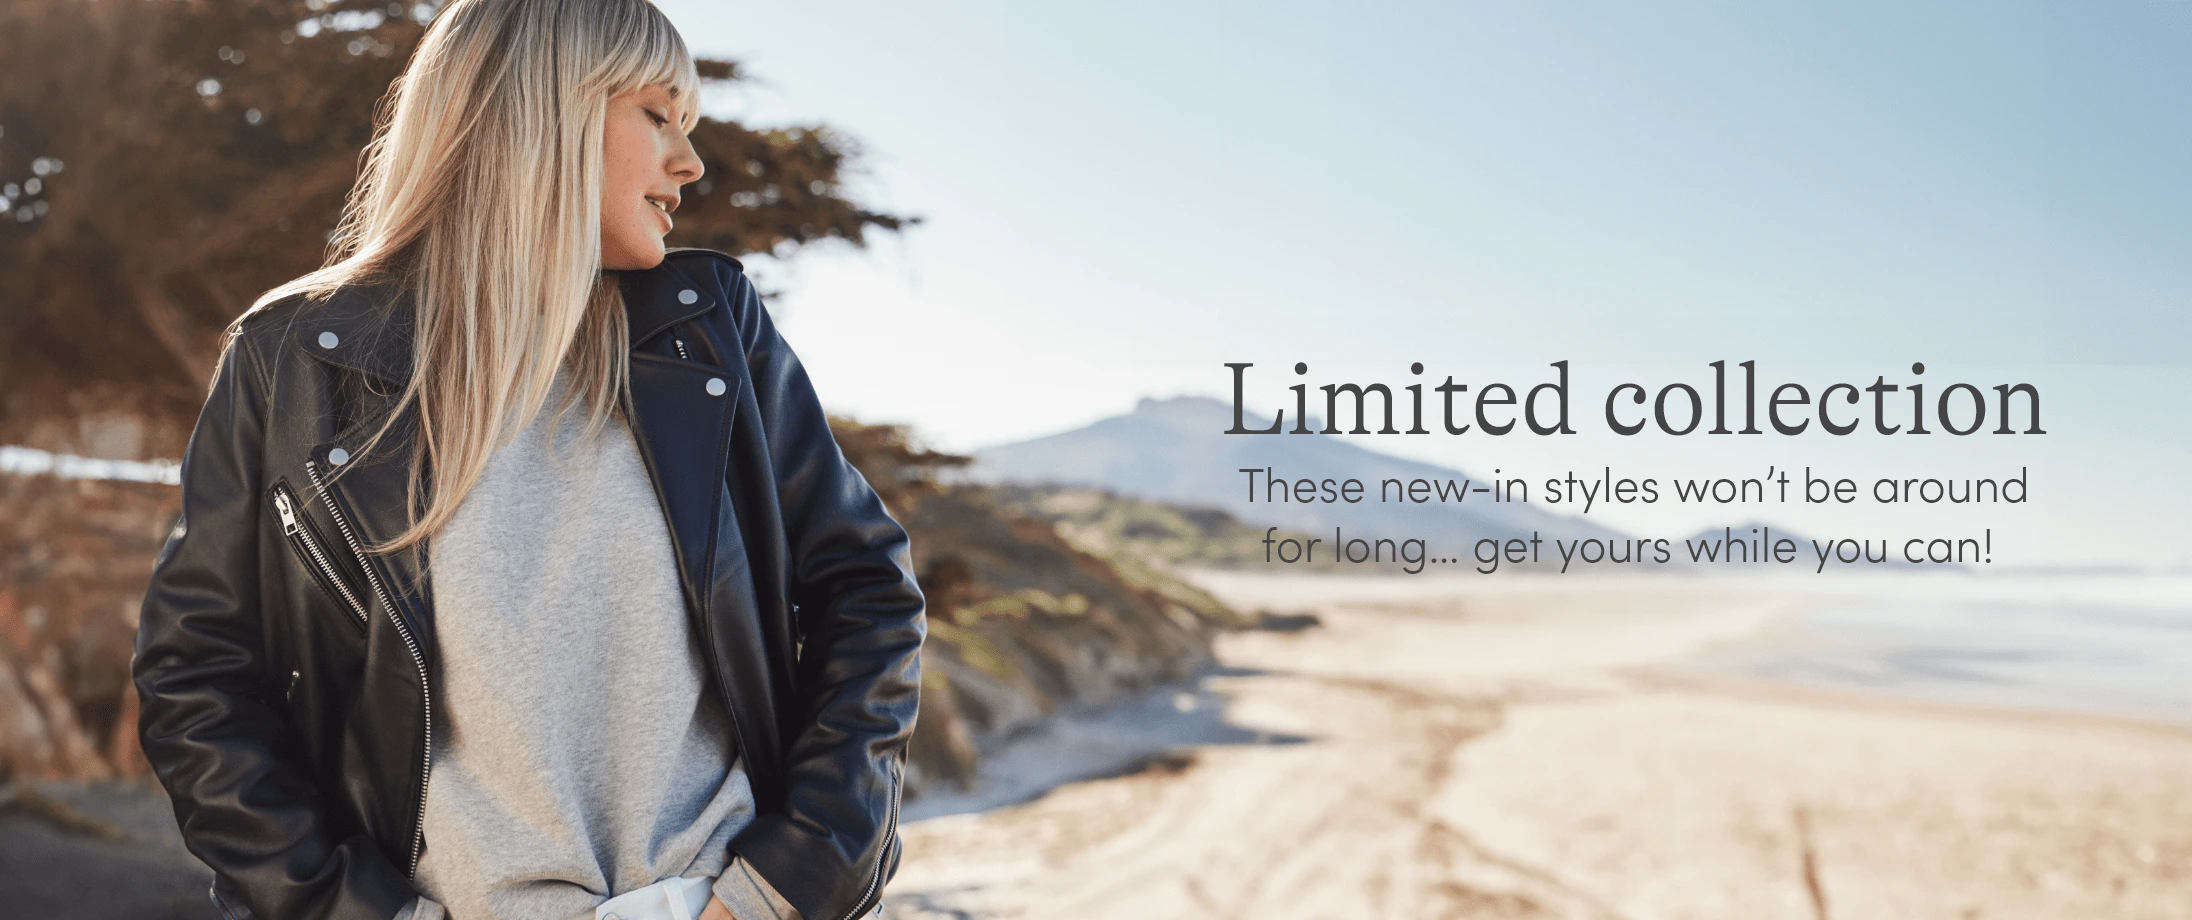 Lands' End - Limited collection